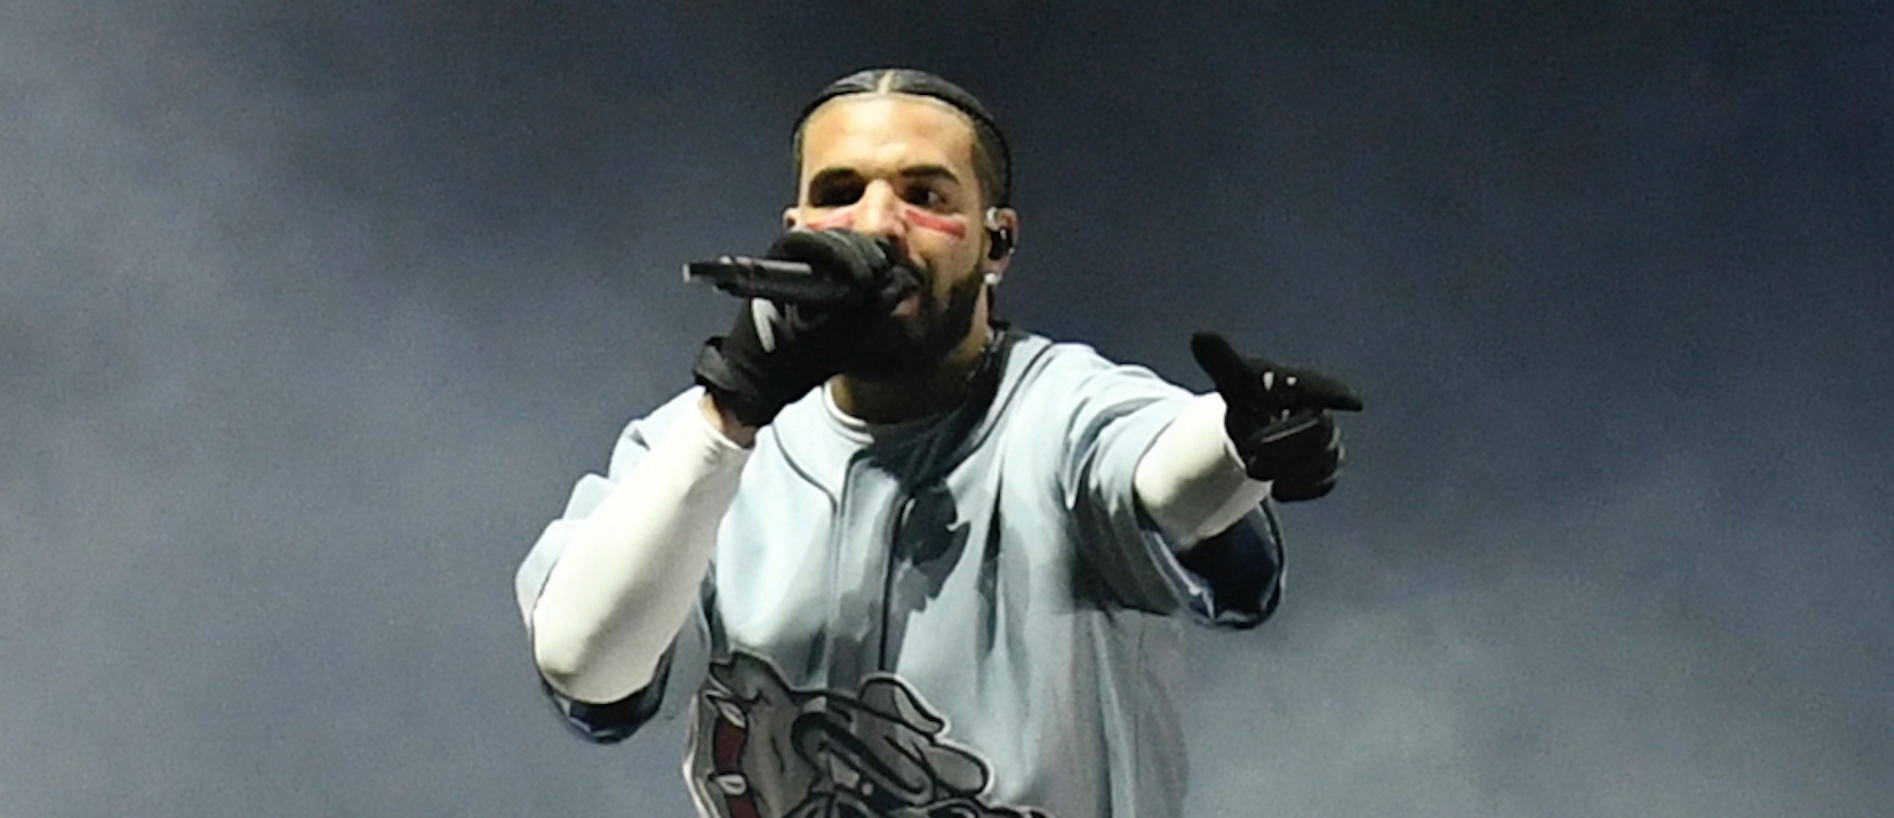 Drake AI Returns With “Winter’s Cold” Song